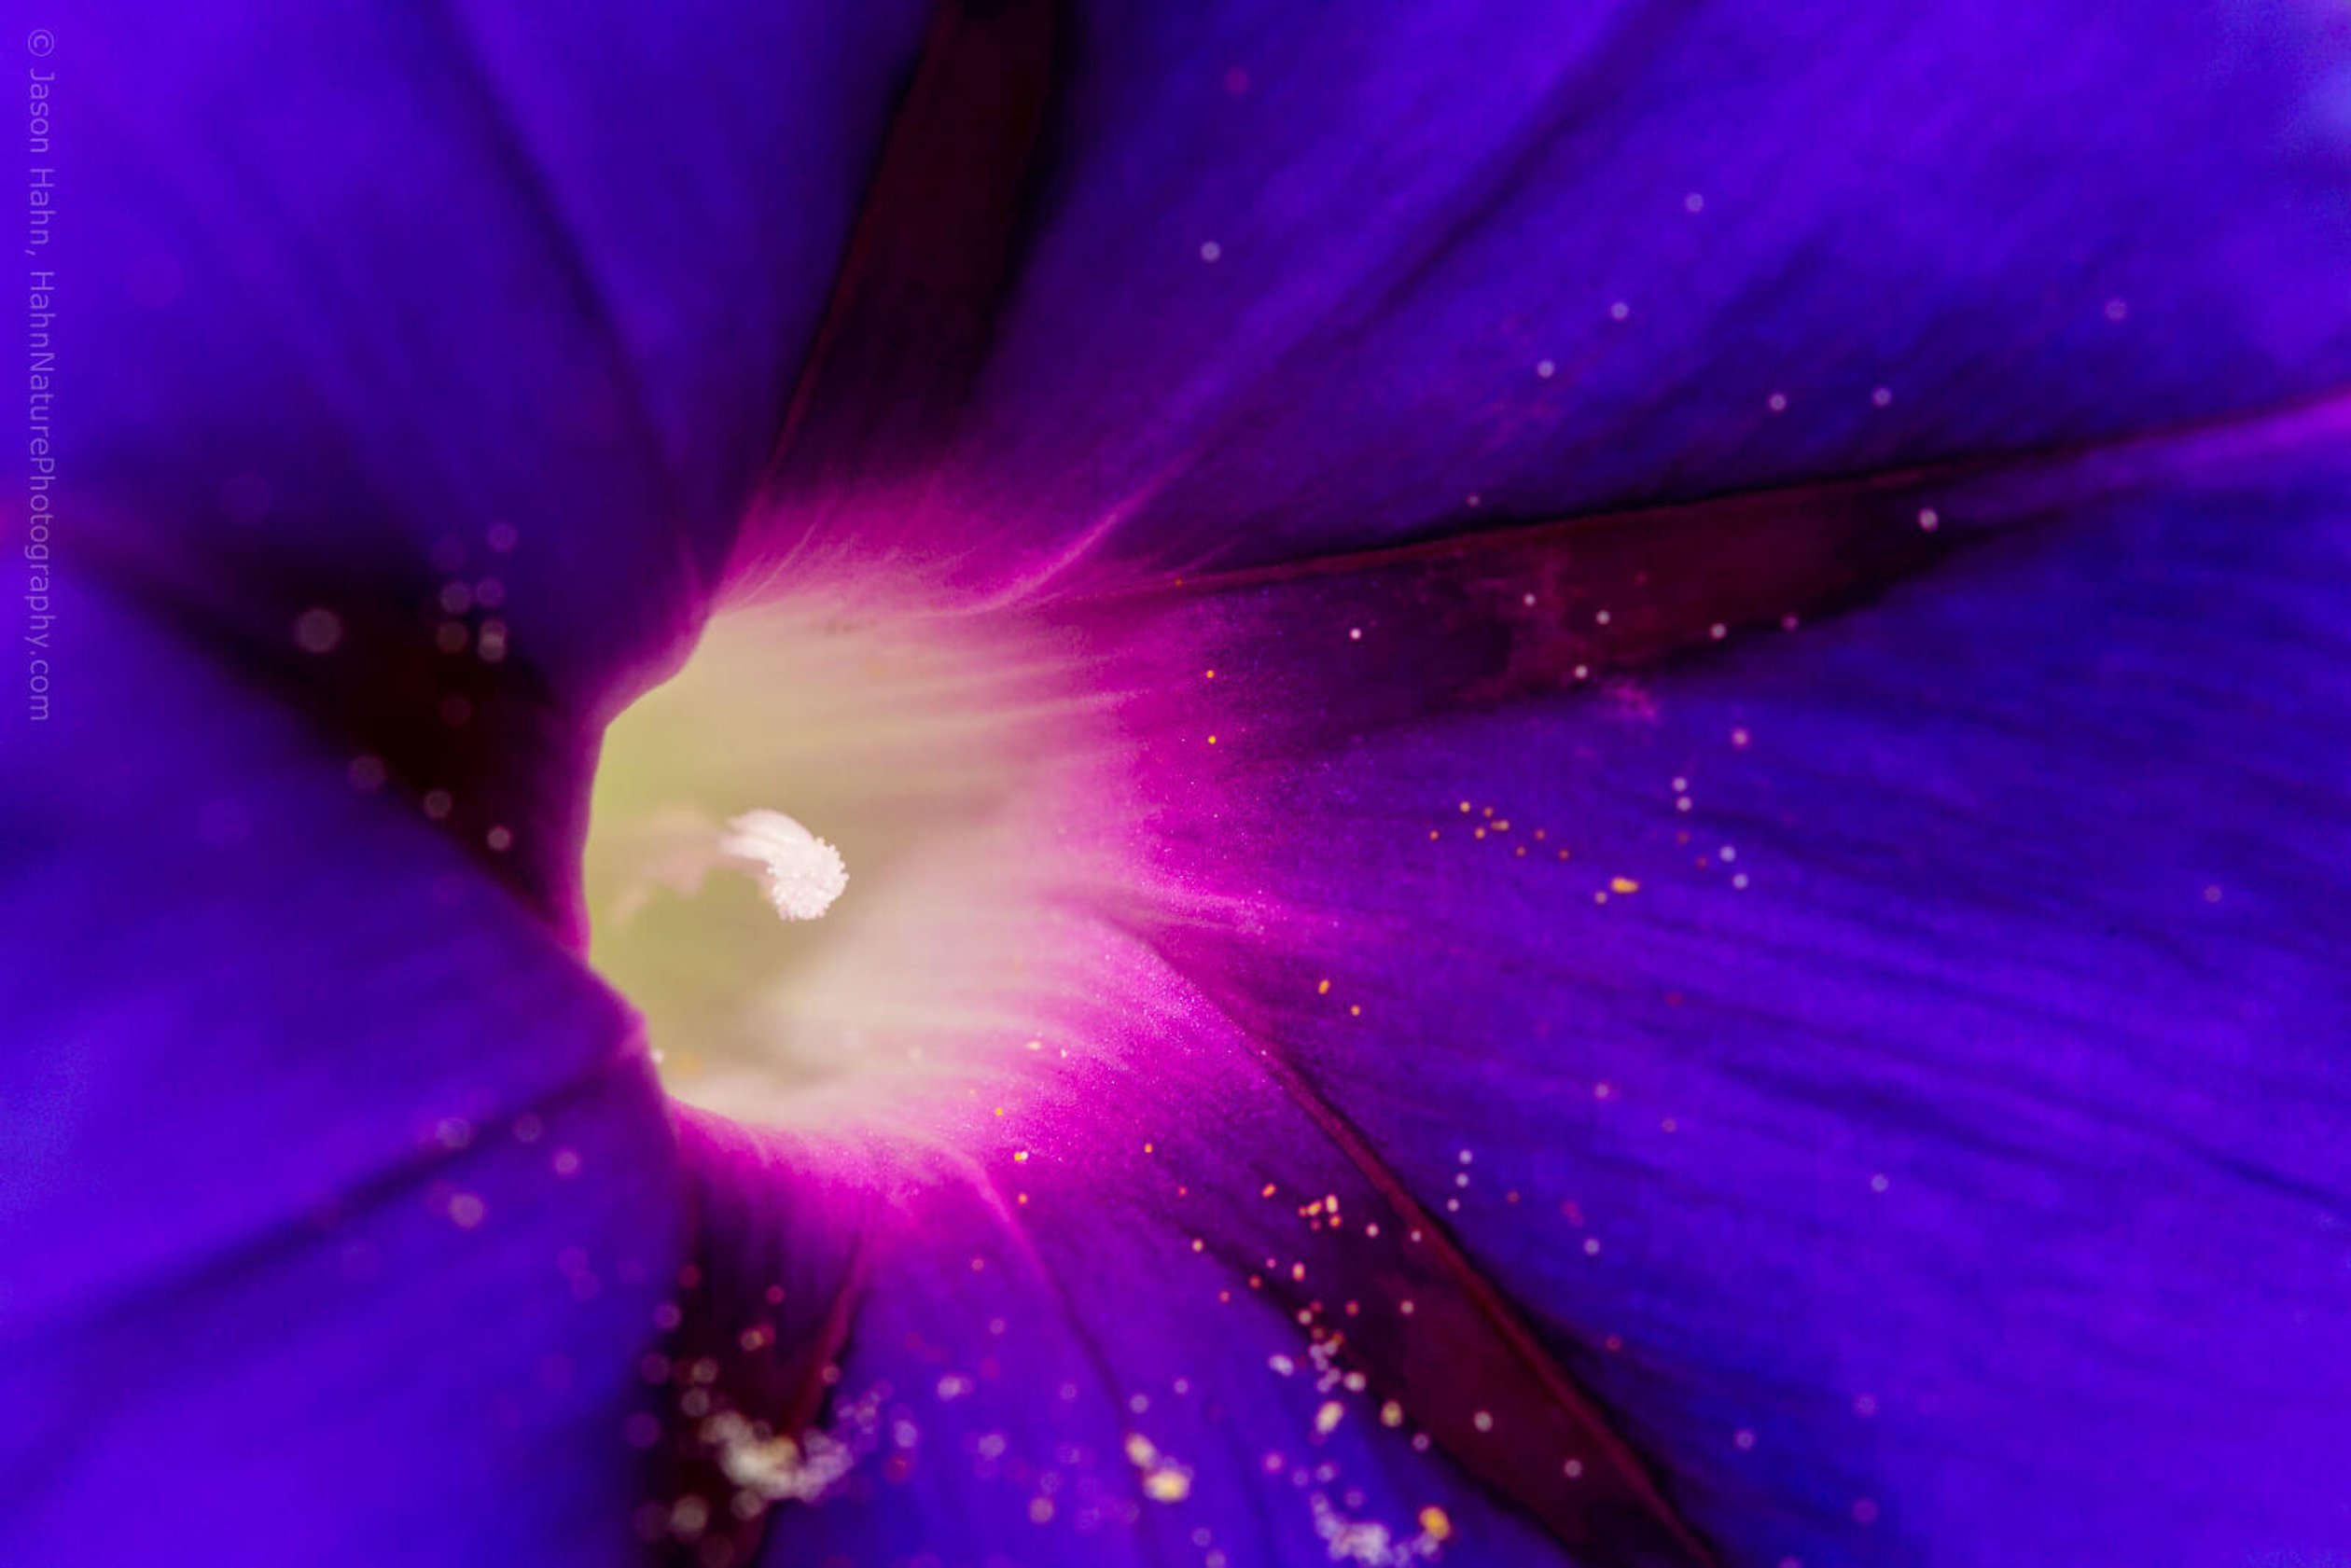 Flower Photography: Do You Know All the Secrets?